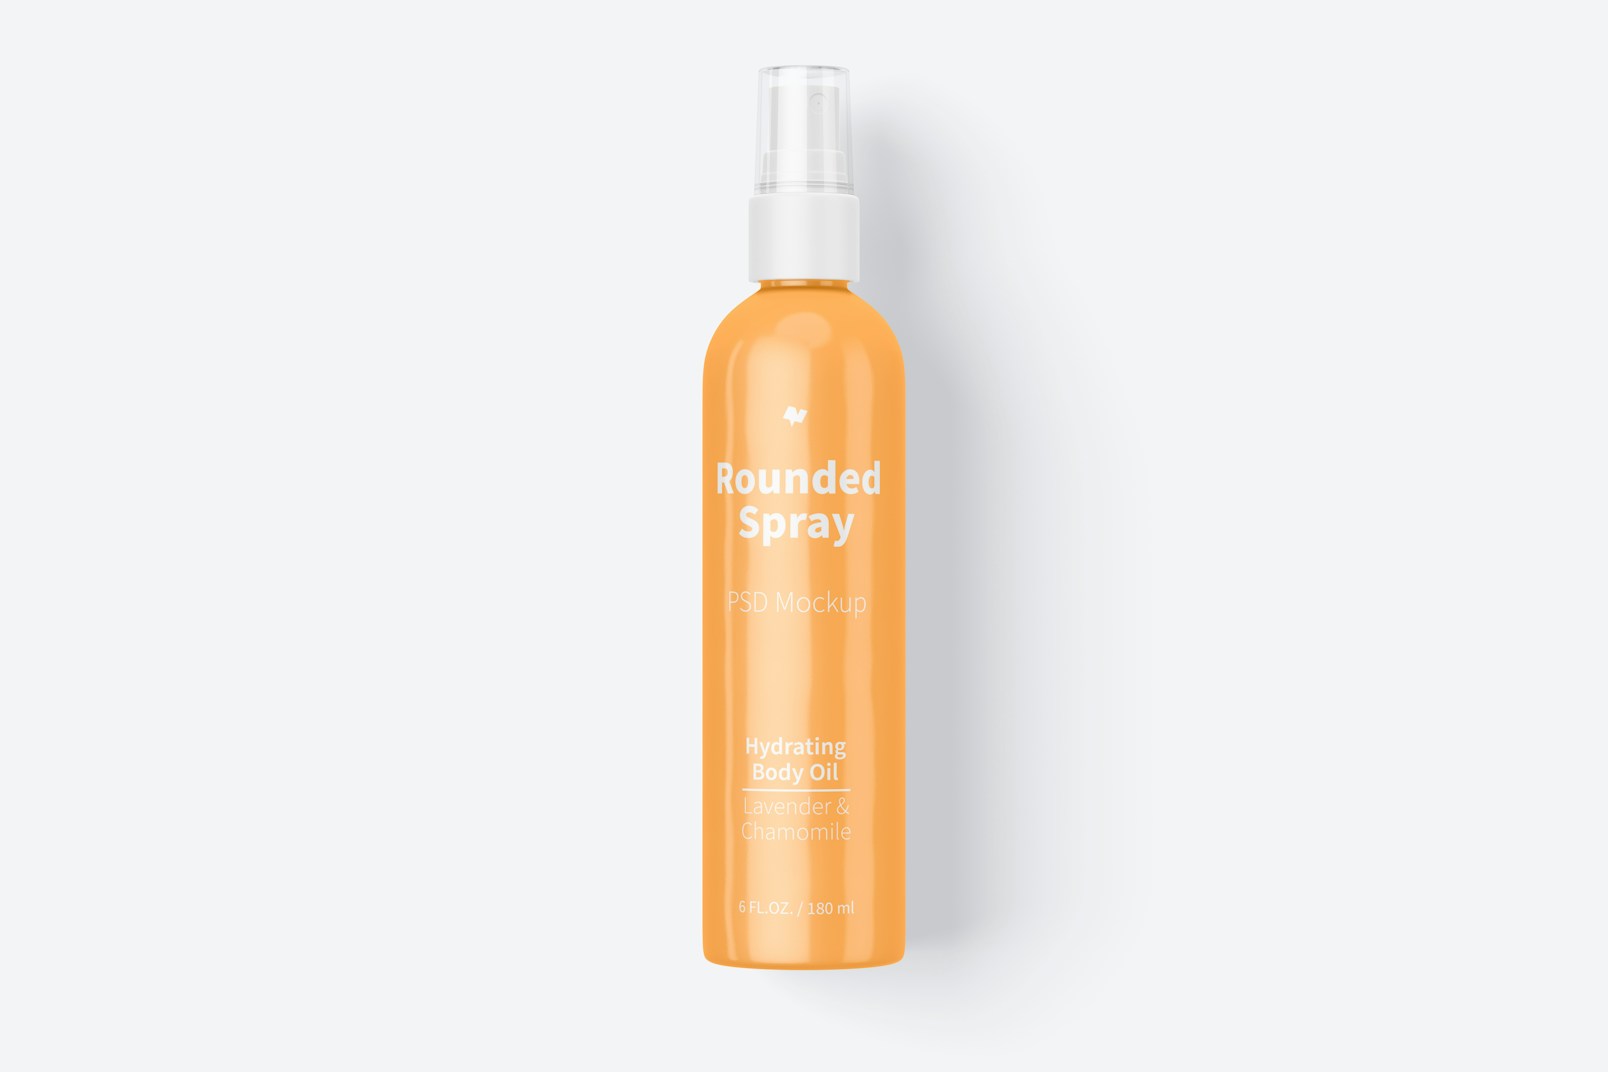 6 Oz Rounded Spray Mockup, Top View 02